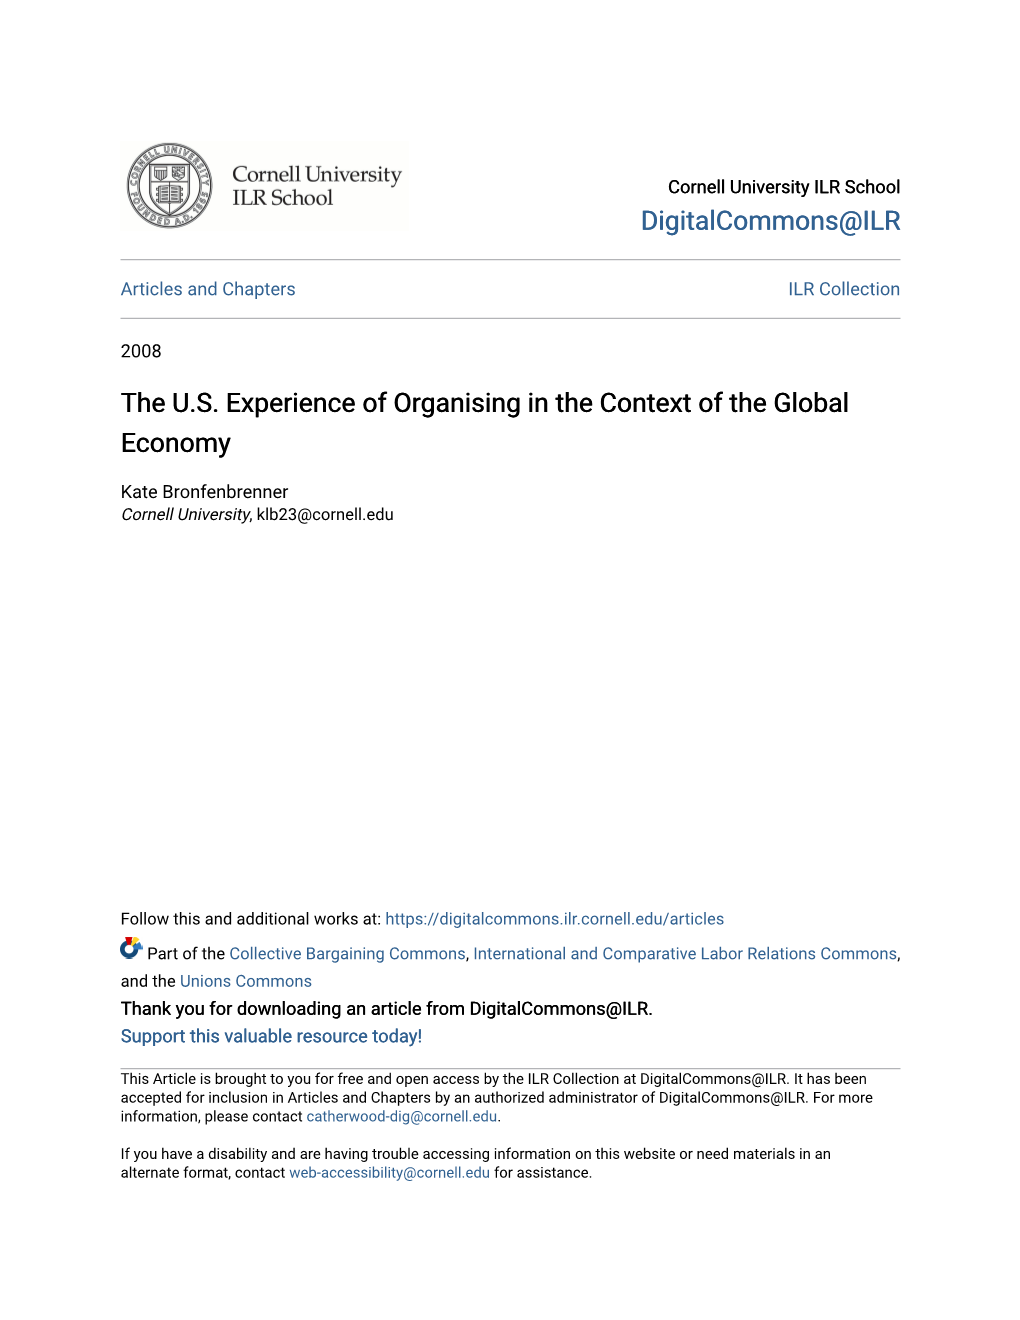 The U.S. Experience of Organising in the Context of the Global Economy